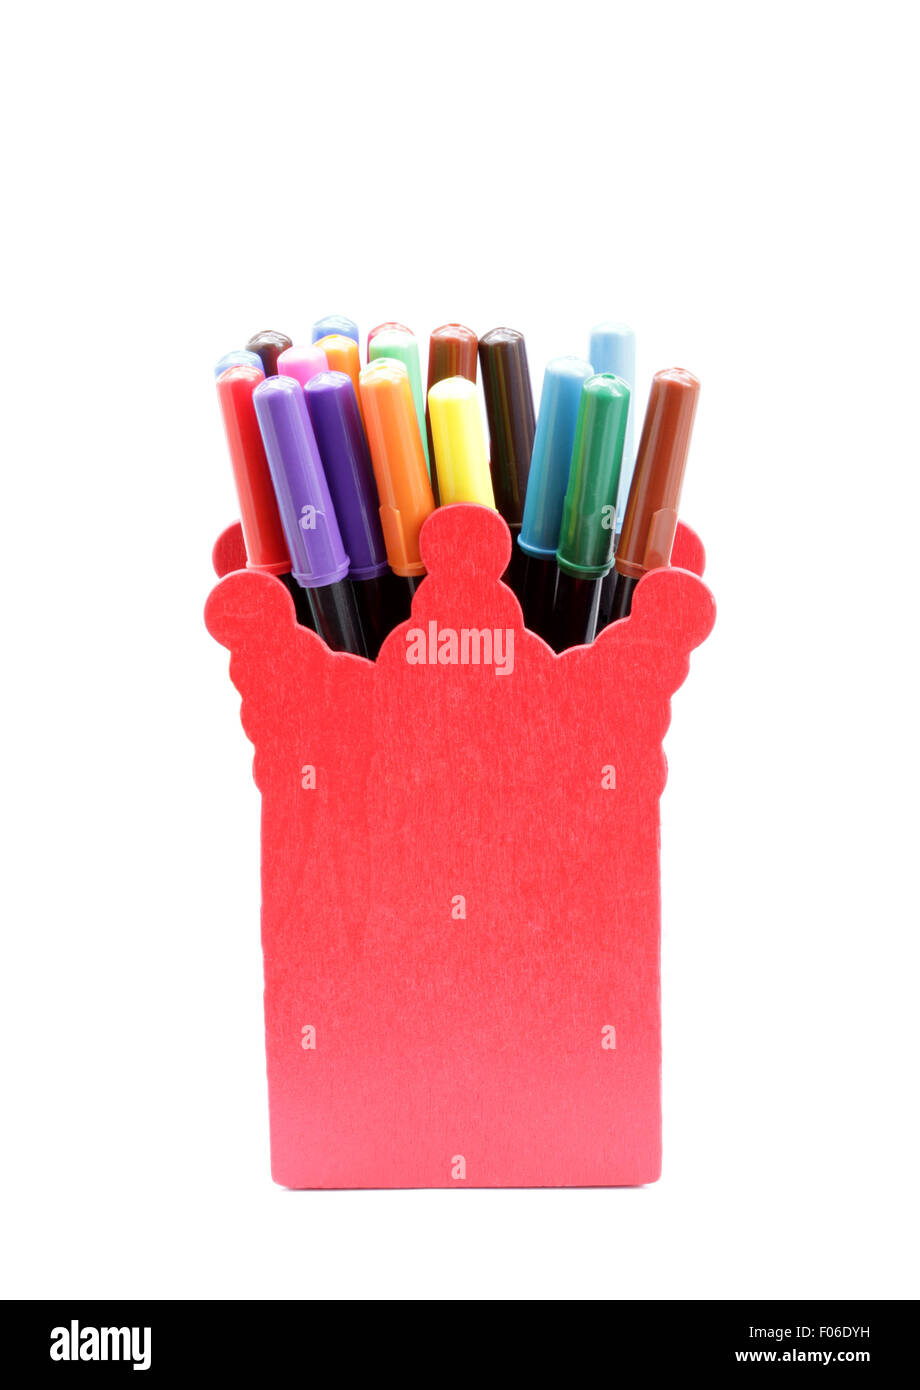 33,086 Pencil Container Images, Stock Photos, 3D objects, & Vectors